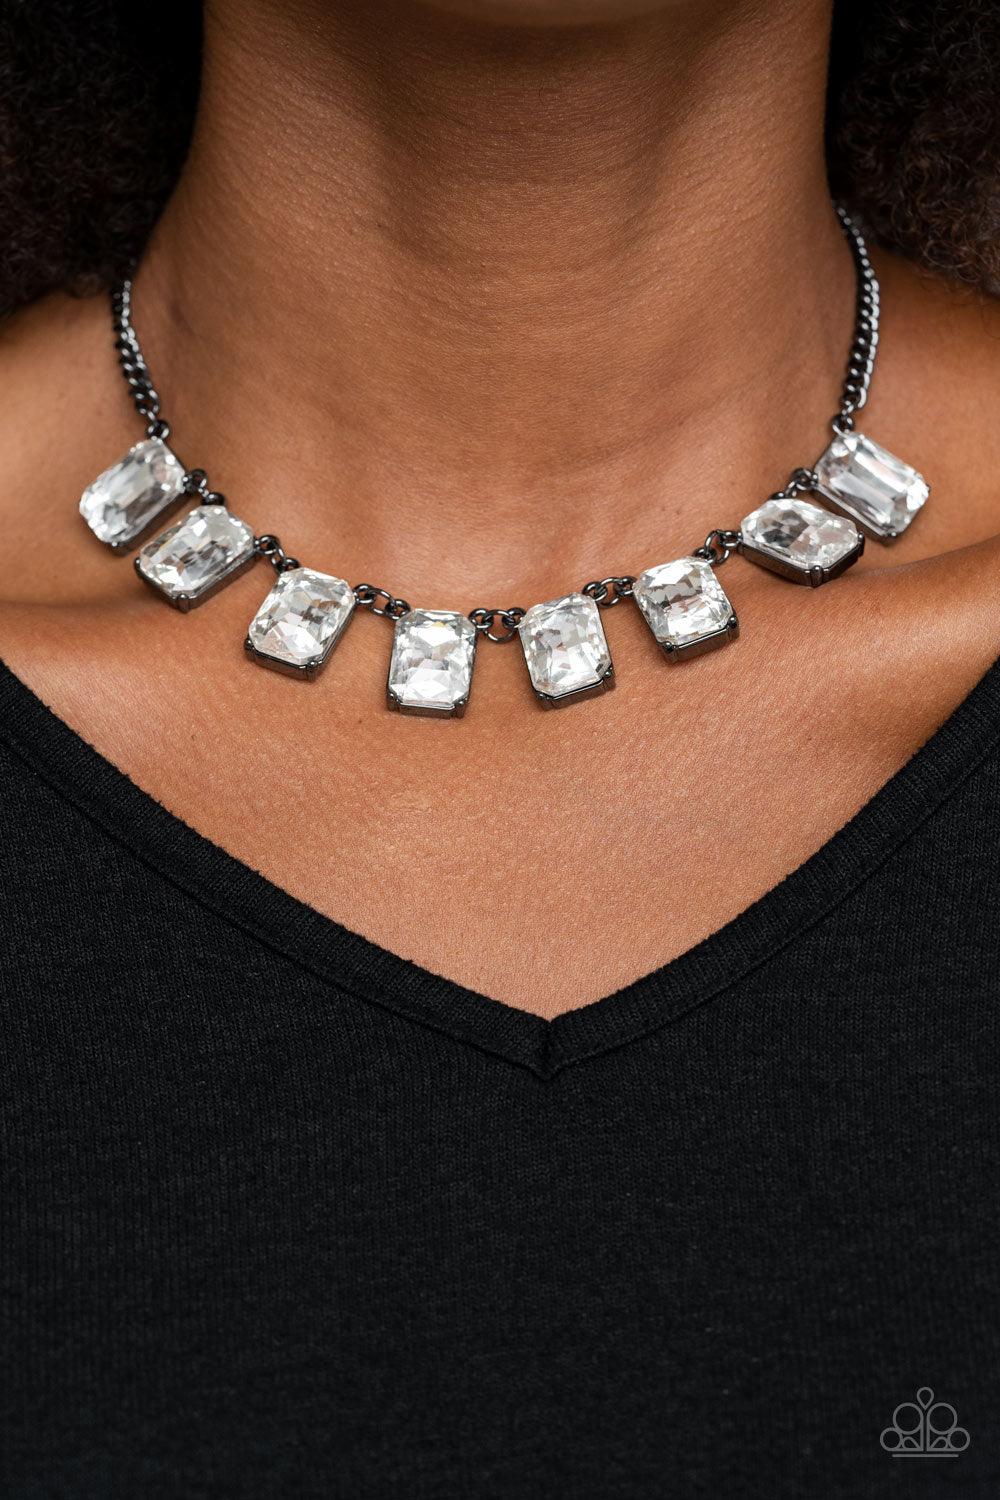 Paparazzi Accessories After Party Access - Black Encased in sleek gunmetal fittings, a regal chain of oversized white emerald style gems link below the collar for a timeless finish. Features an adjustable clasp closure. Sold as one individual necklace. In